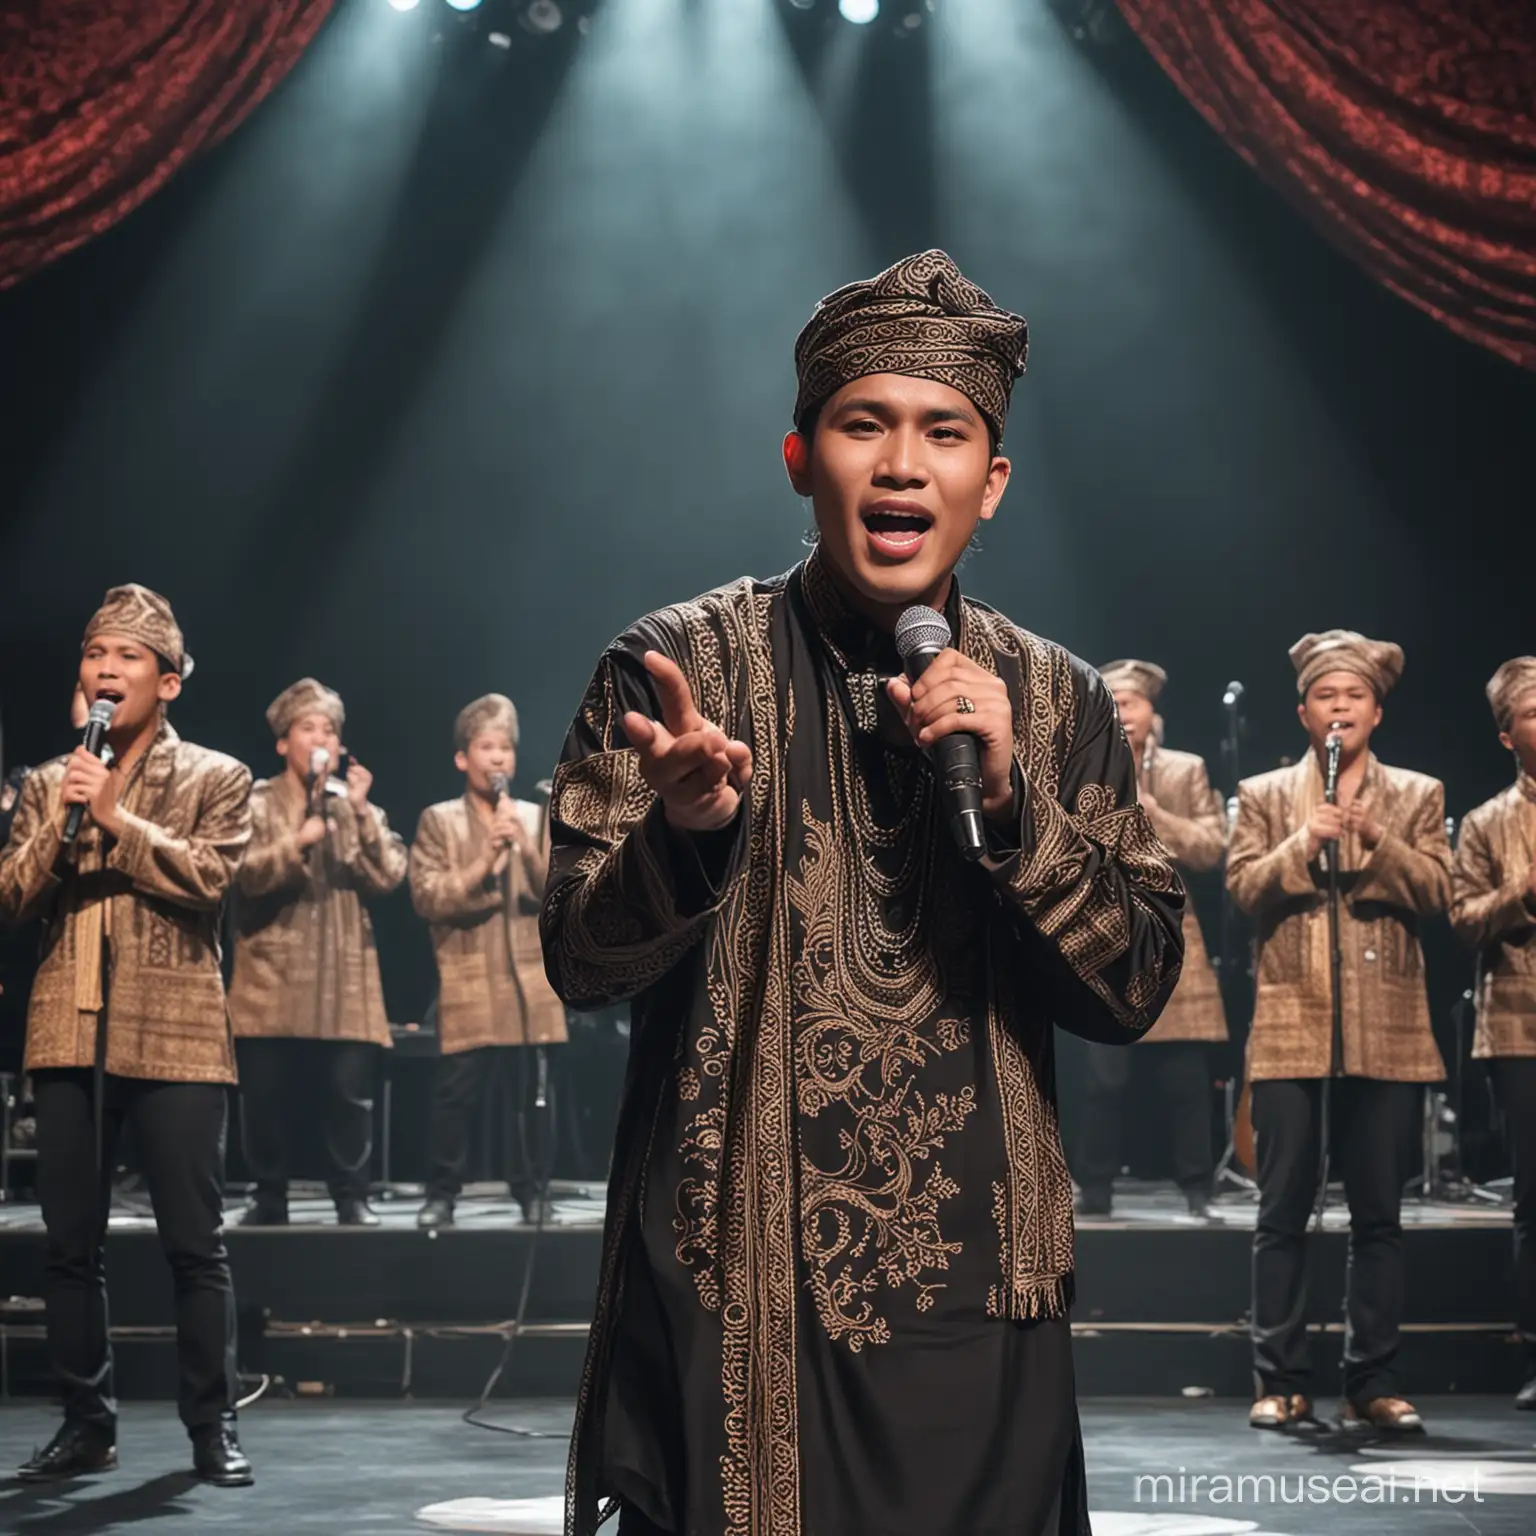 Luxurious Indonesian Male Singer Performing on Lavish Stage with Full Band